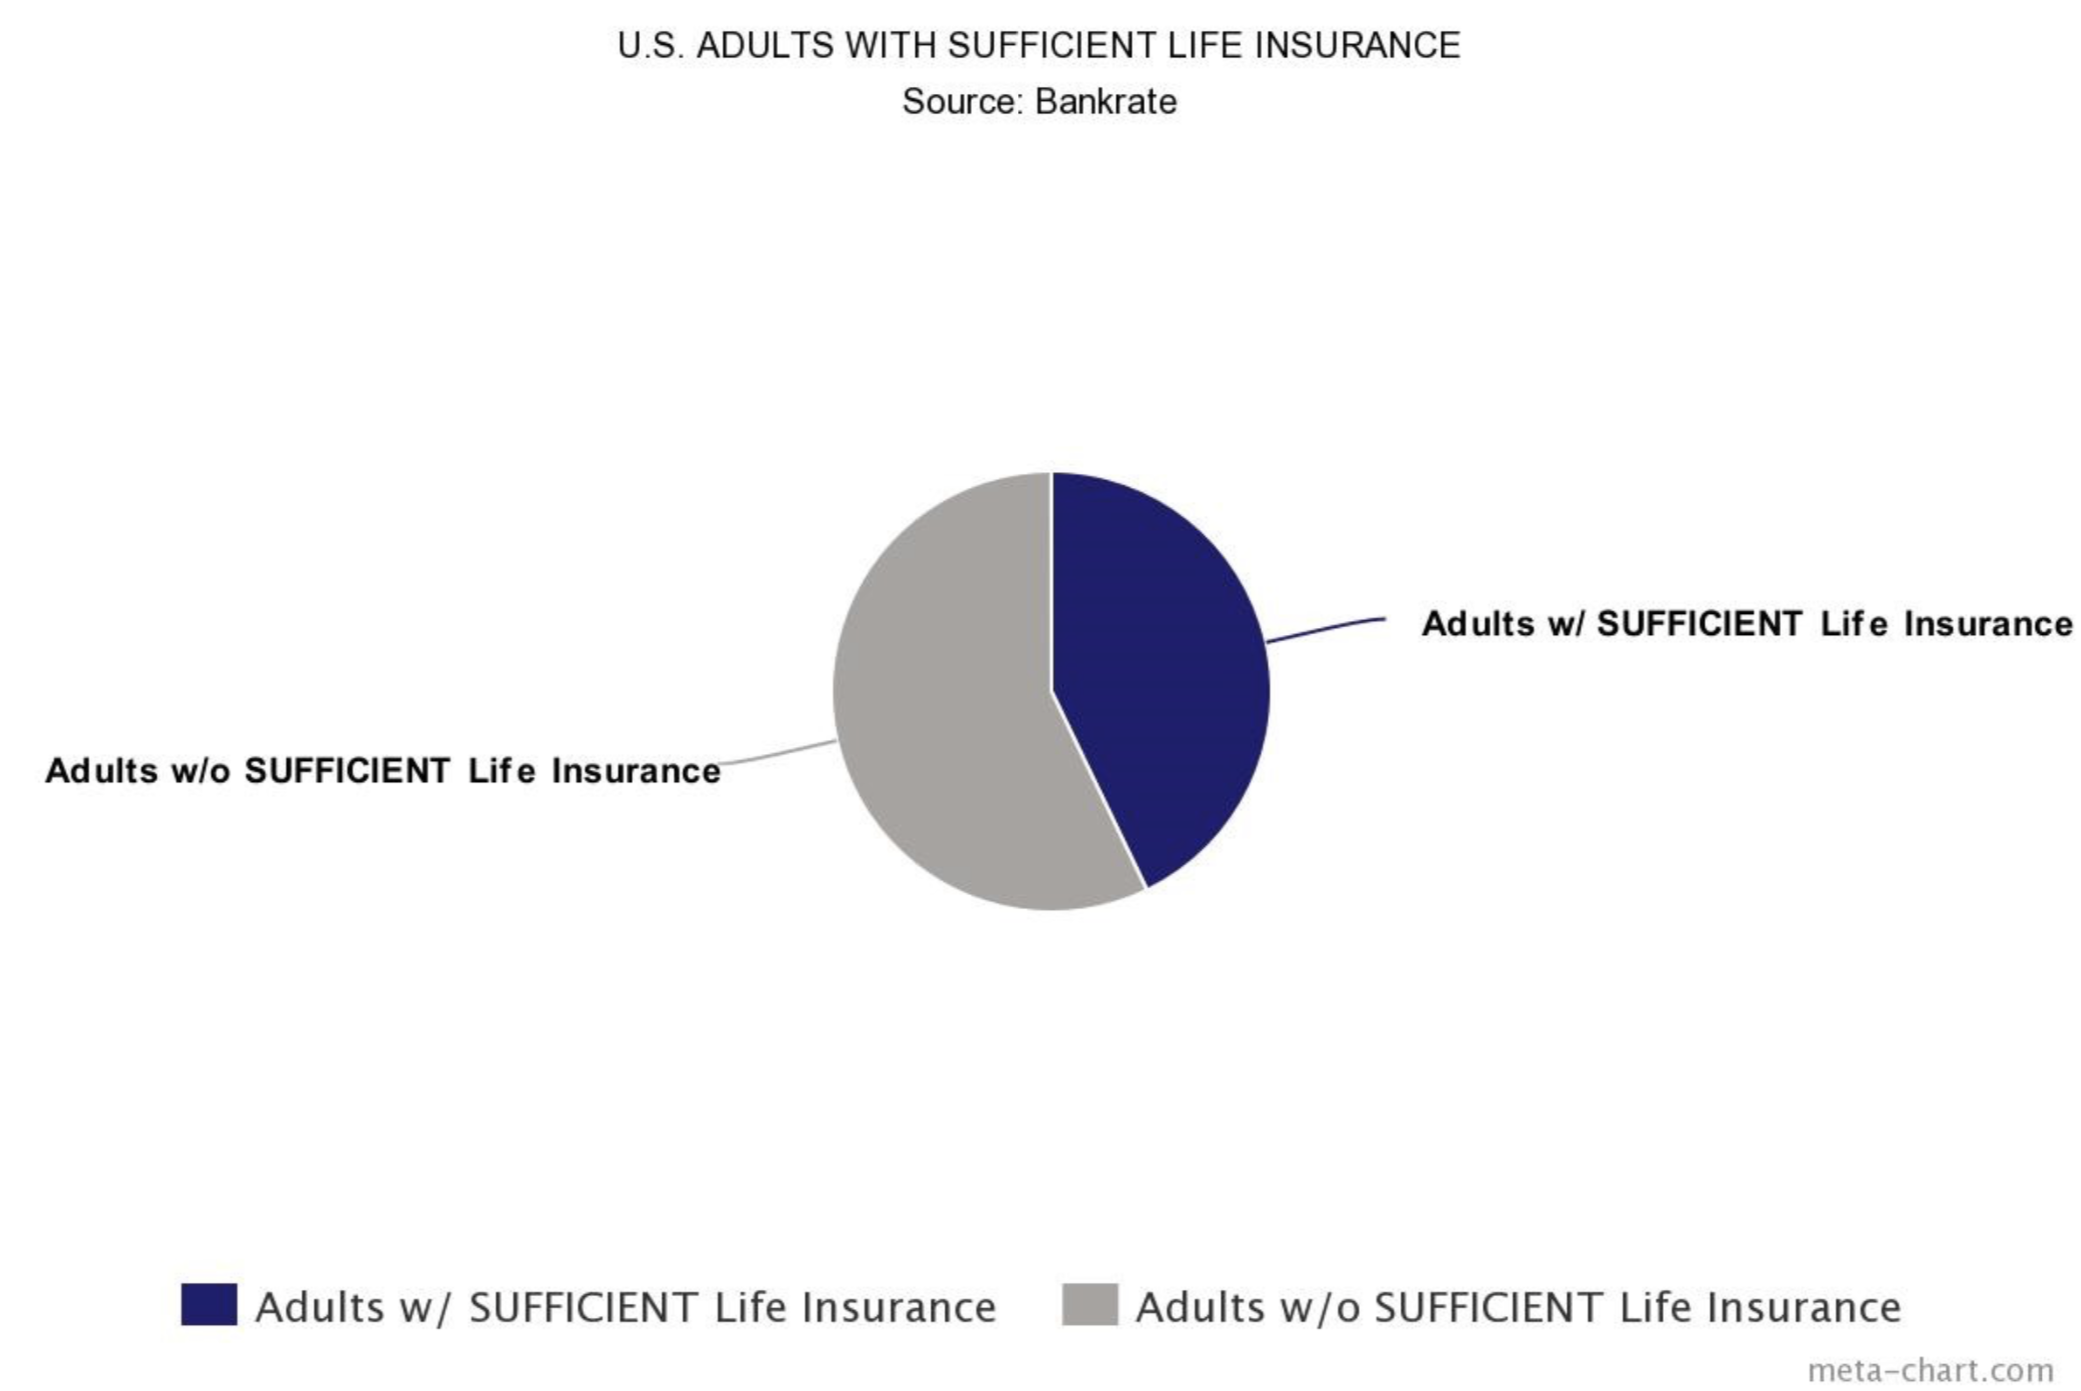 annual insurance review - graph 2